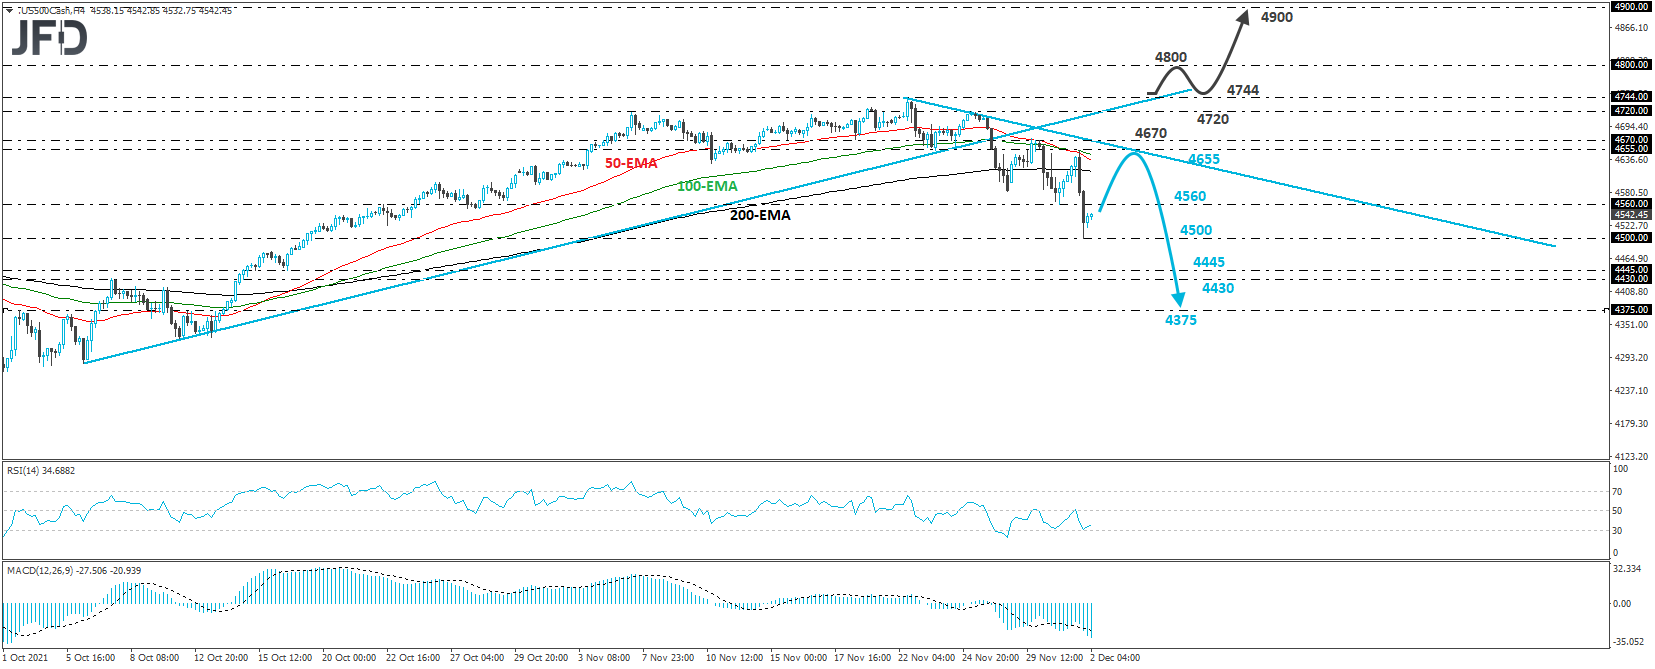 S&P 500 cash index 4-hour chart technical analysis.